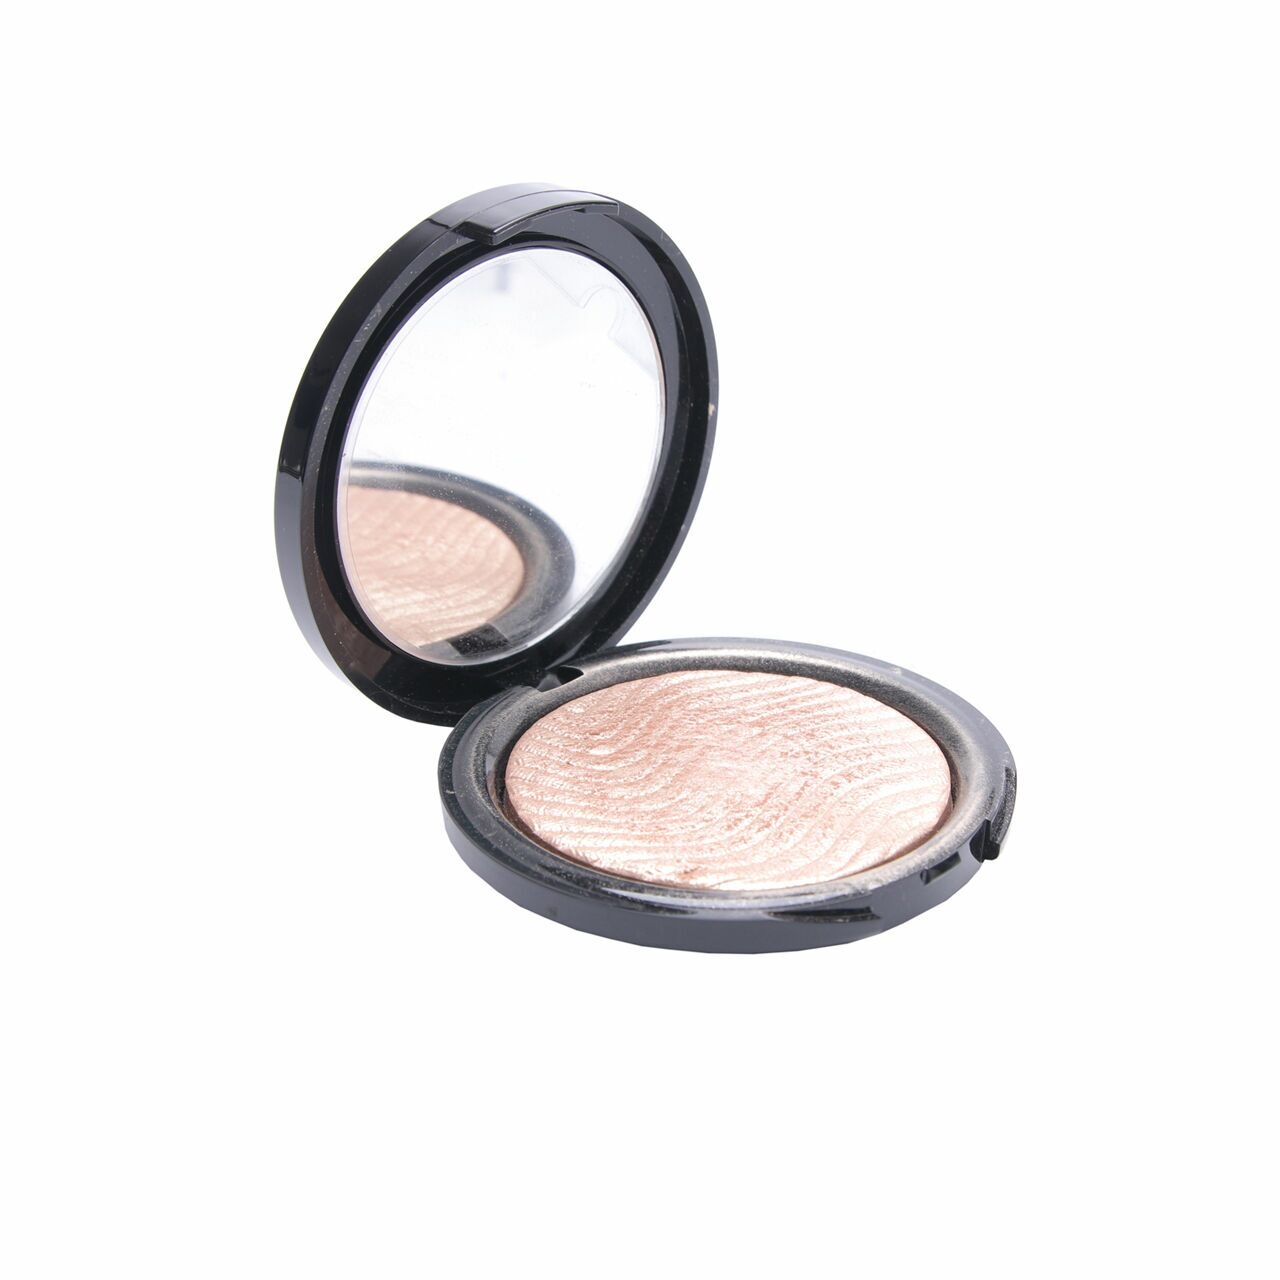 Make Up For Ever Enlumineur Pro Light Fusion Faces